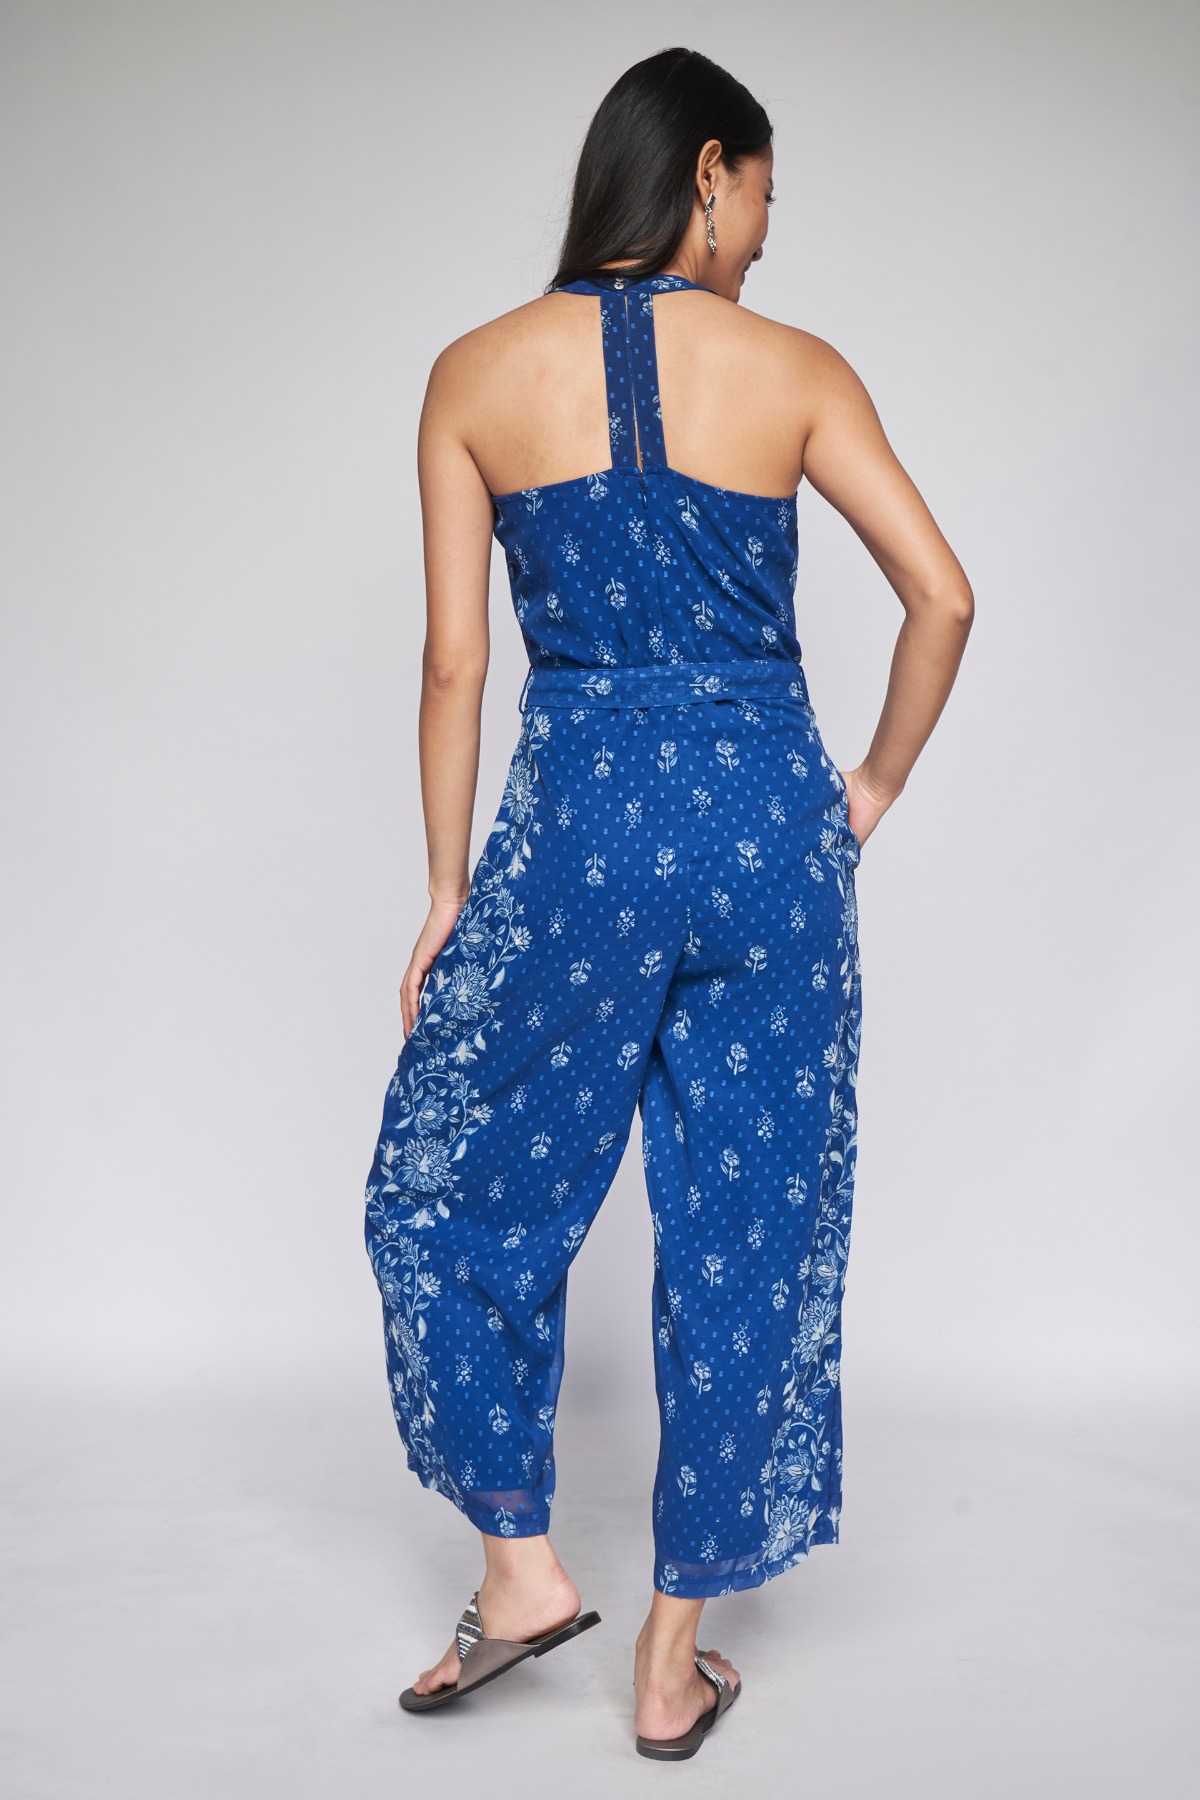 What Are the Best Jumpsuits? | Coveralls women, Jumpsuits for women,  Jumpsuit